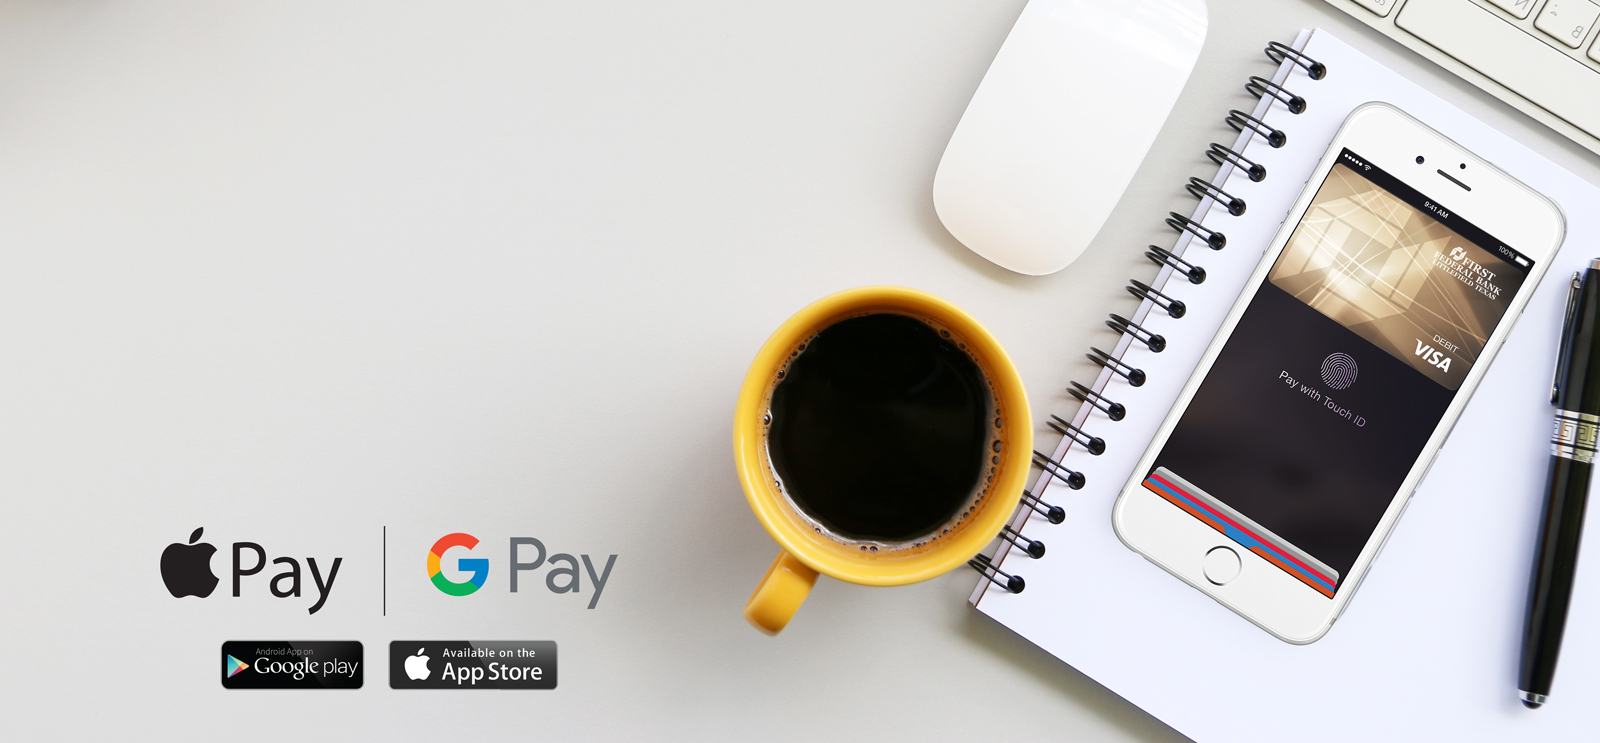 A cup of coffee and an iPhone showing Apple Pay